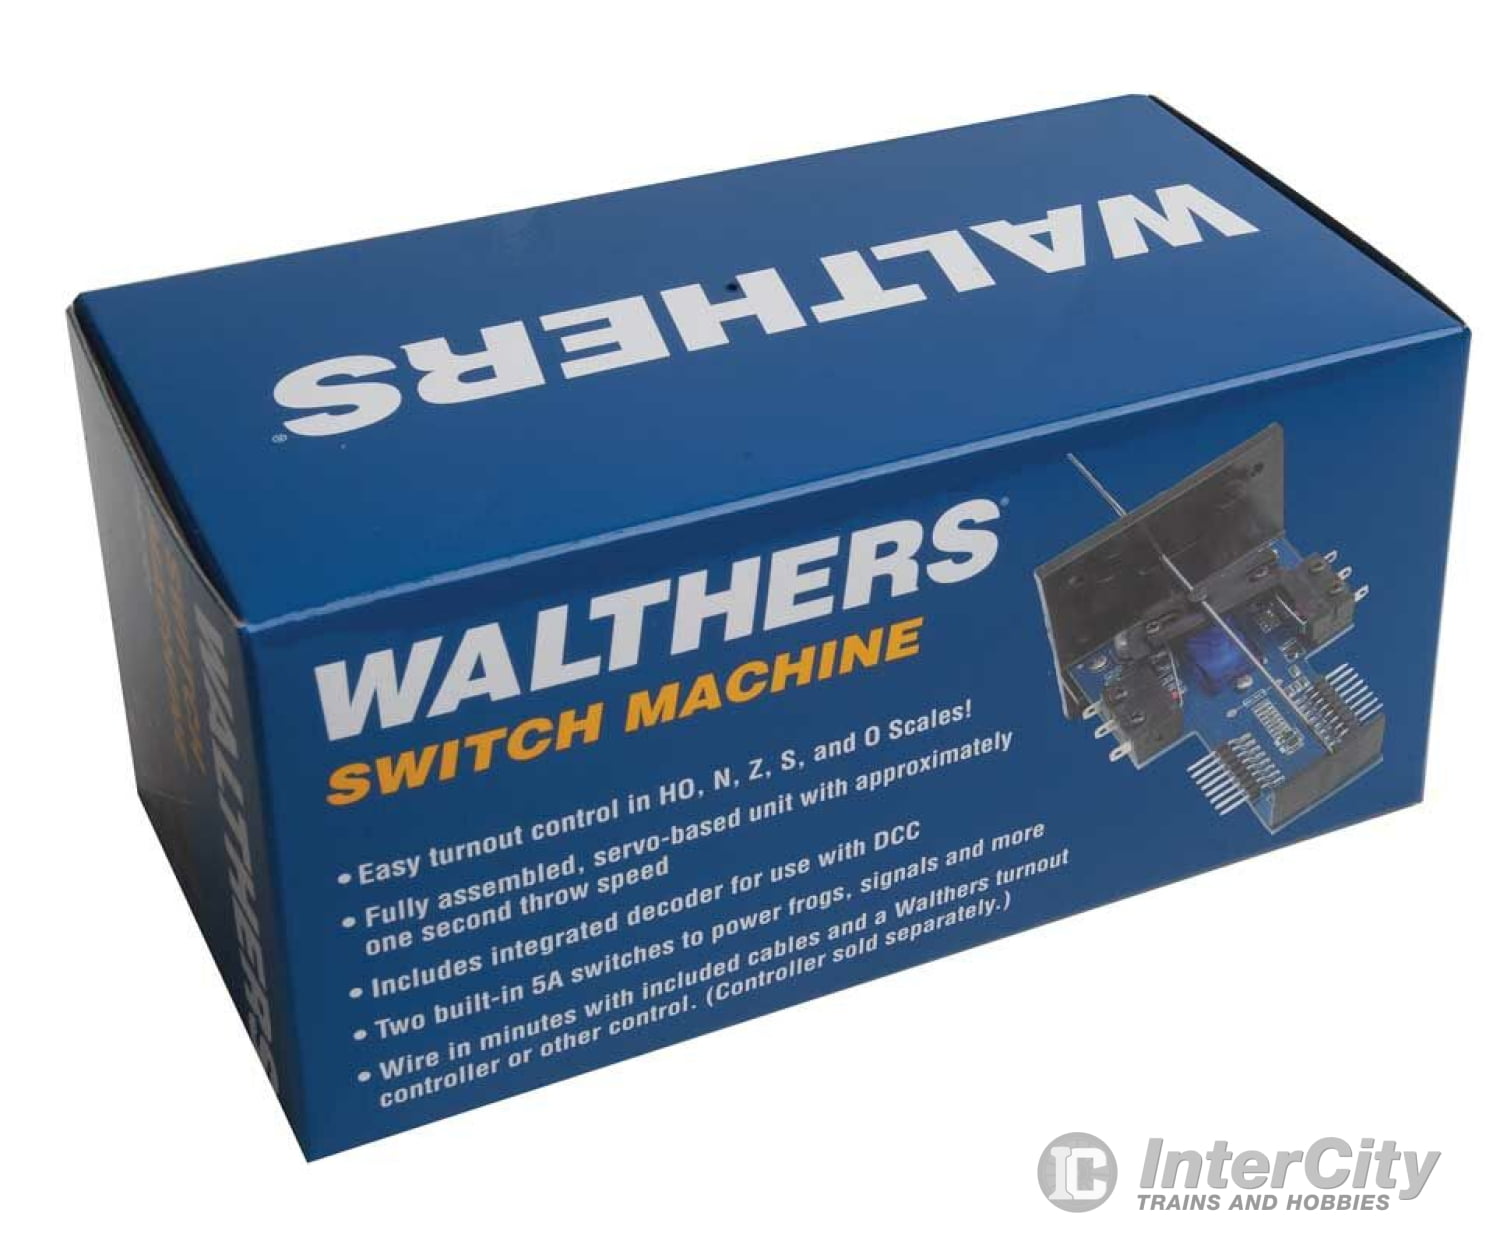 Walthers 101 Layout Control System -- Vertical-Mount Switch Machine Track Accessories